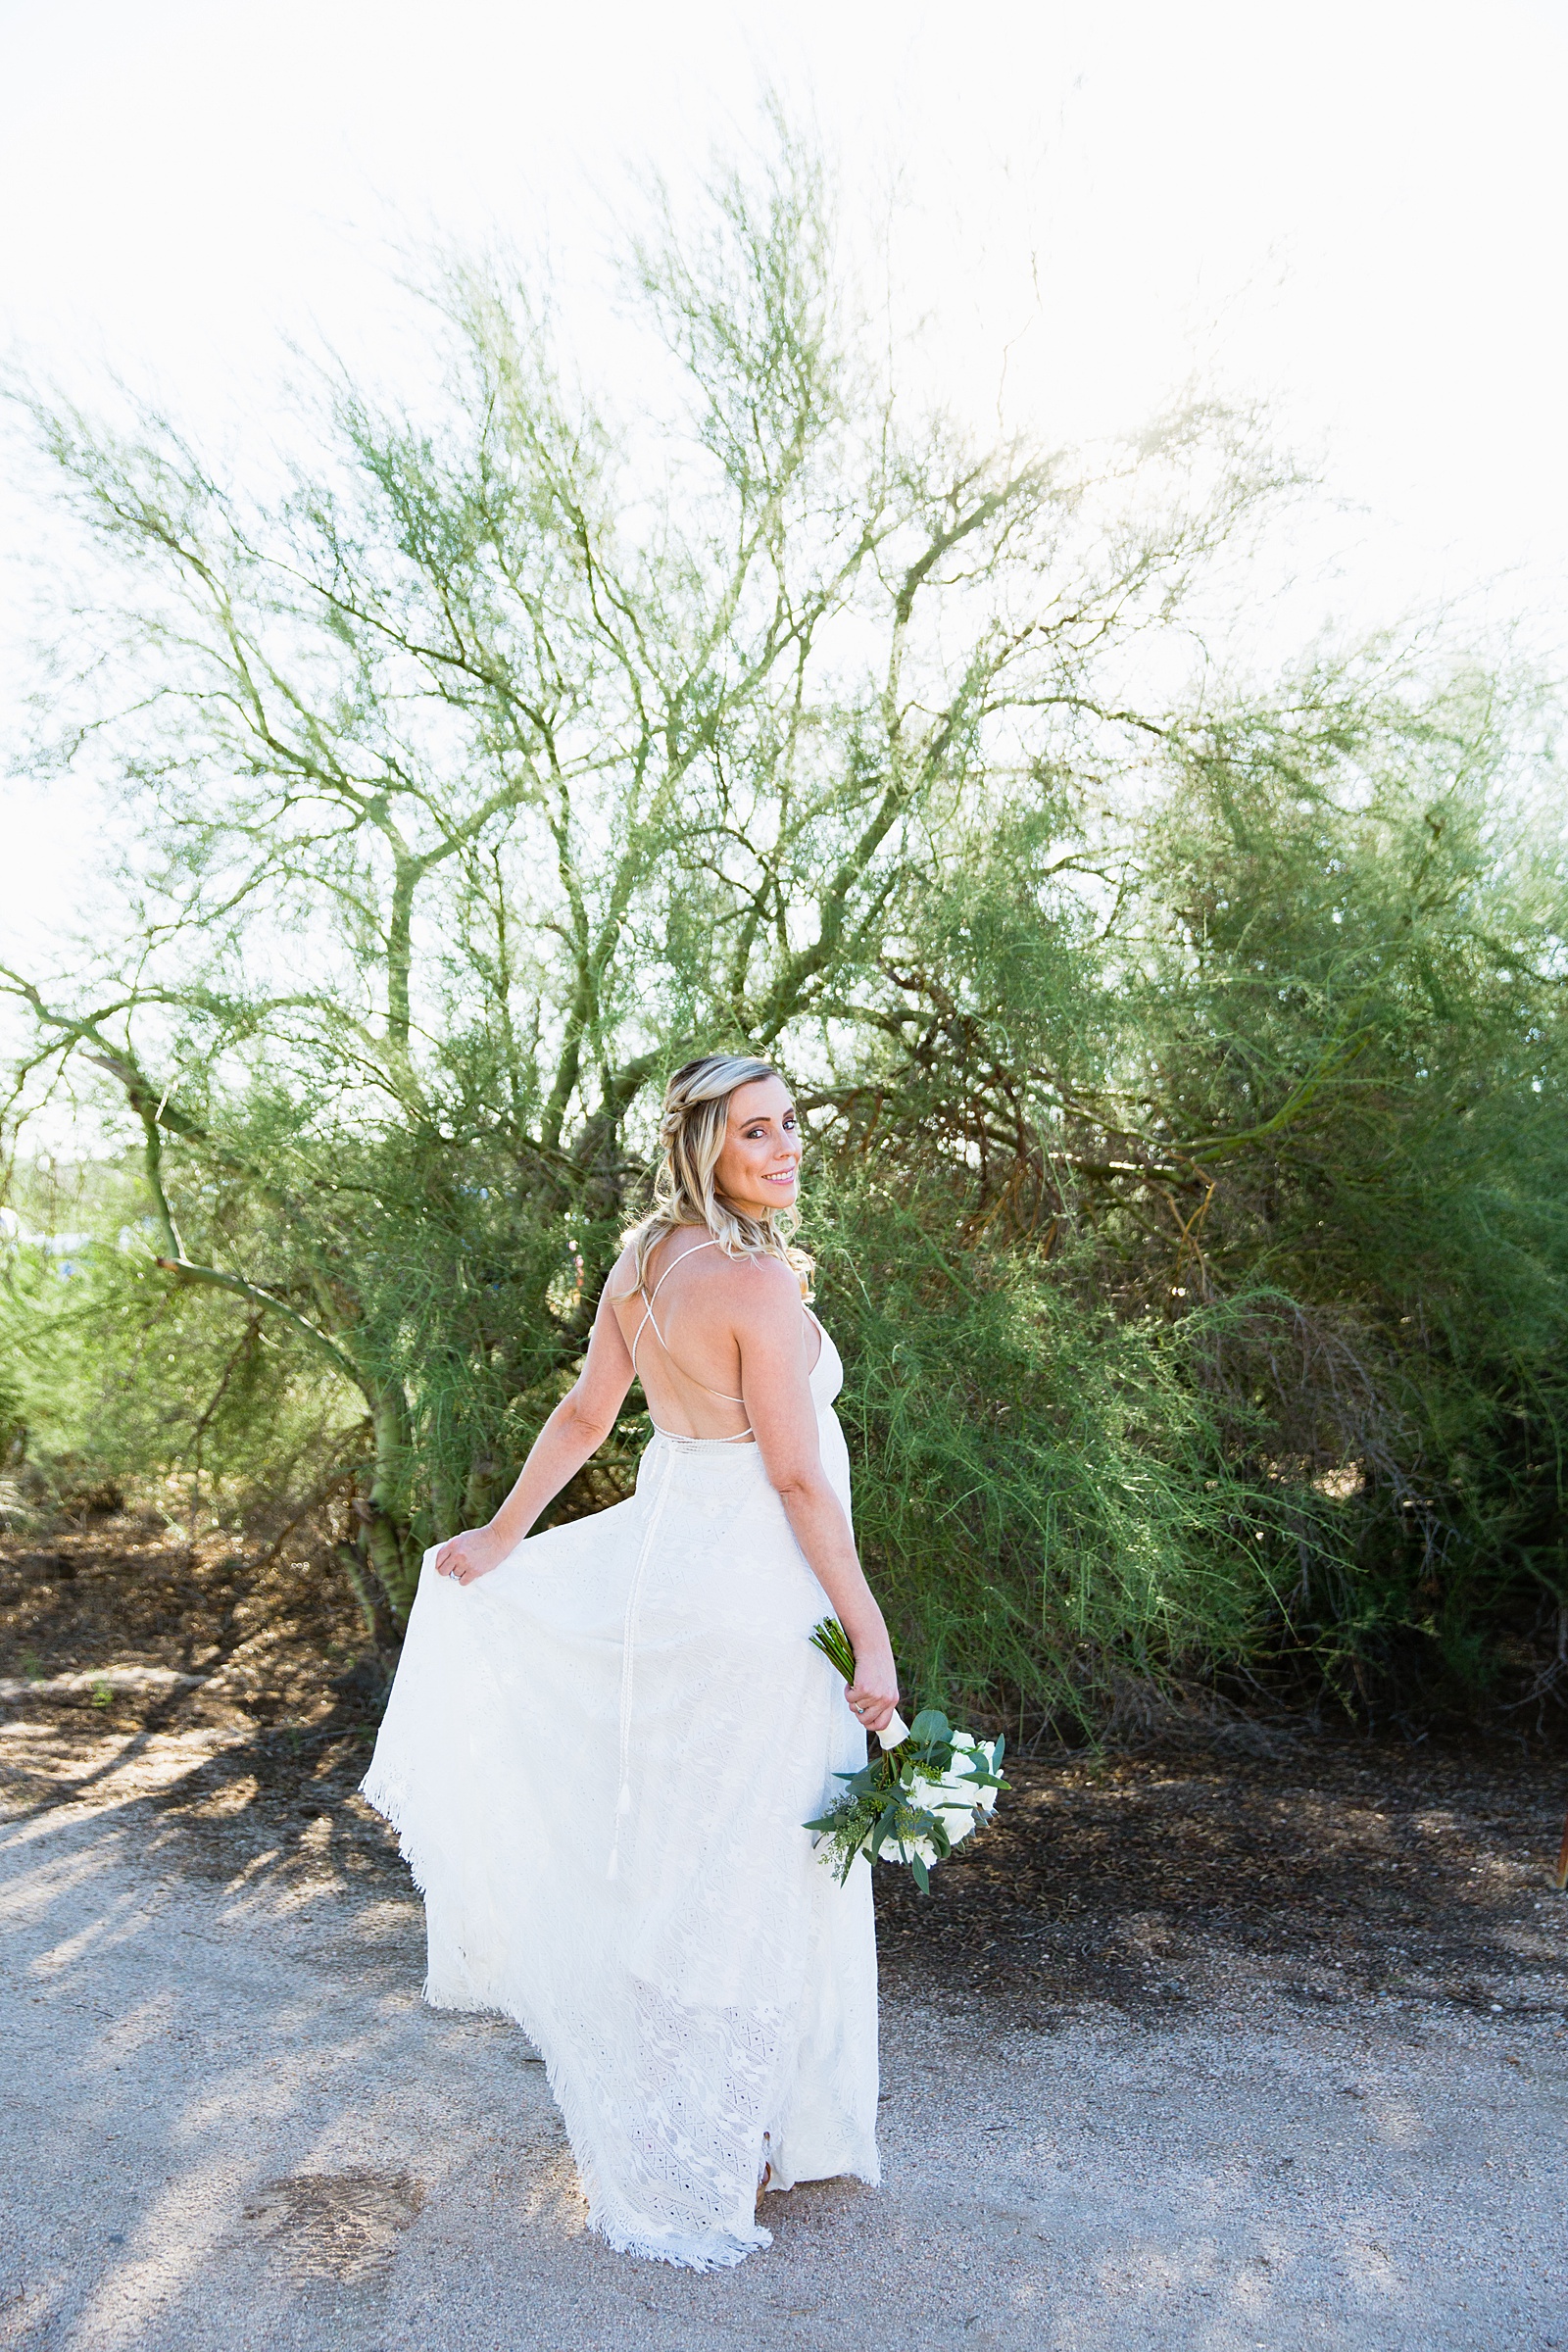 Bride twirling in her simple boho style dress for her Scottsdale backyard elopement by Arizona wedding photographer PMA Photography.